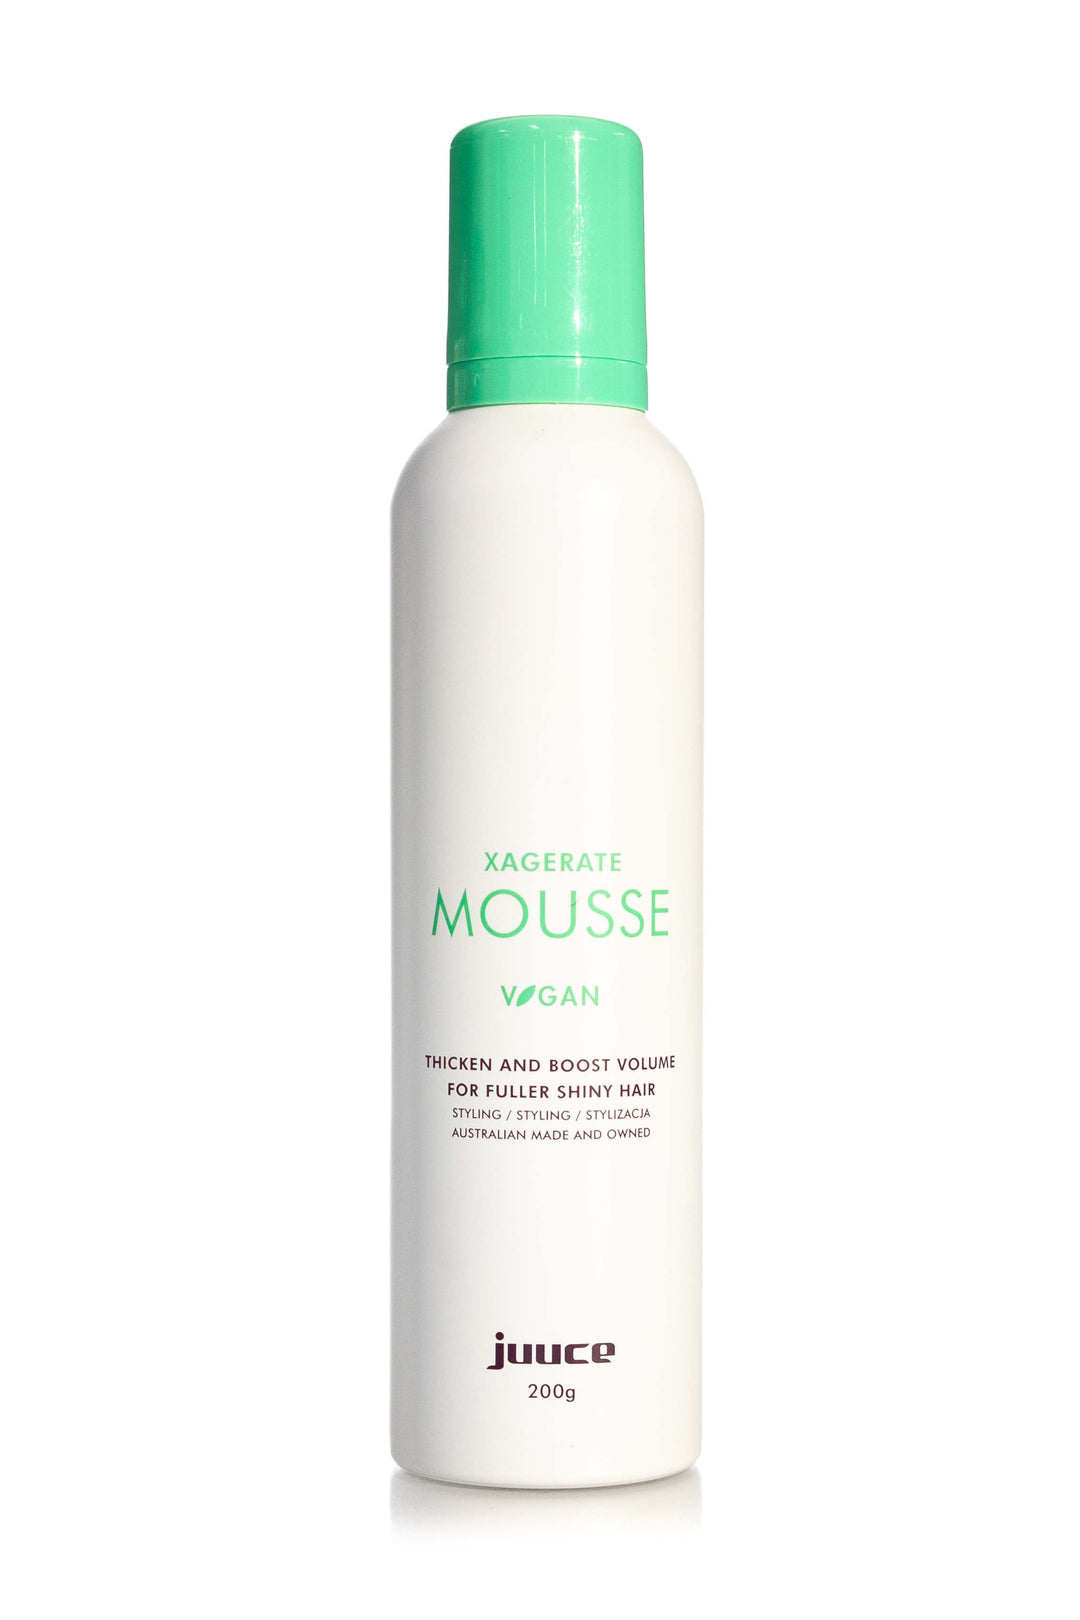 Juuce Xagerate Mousse